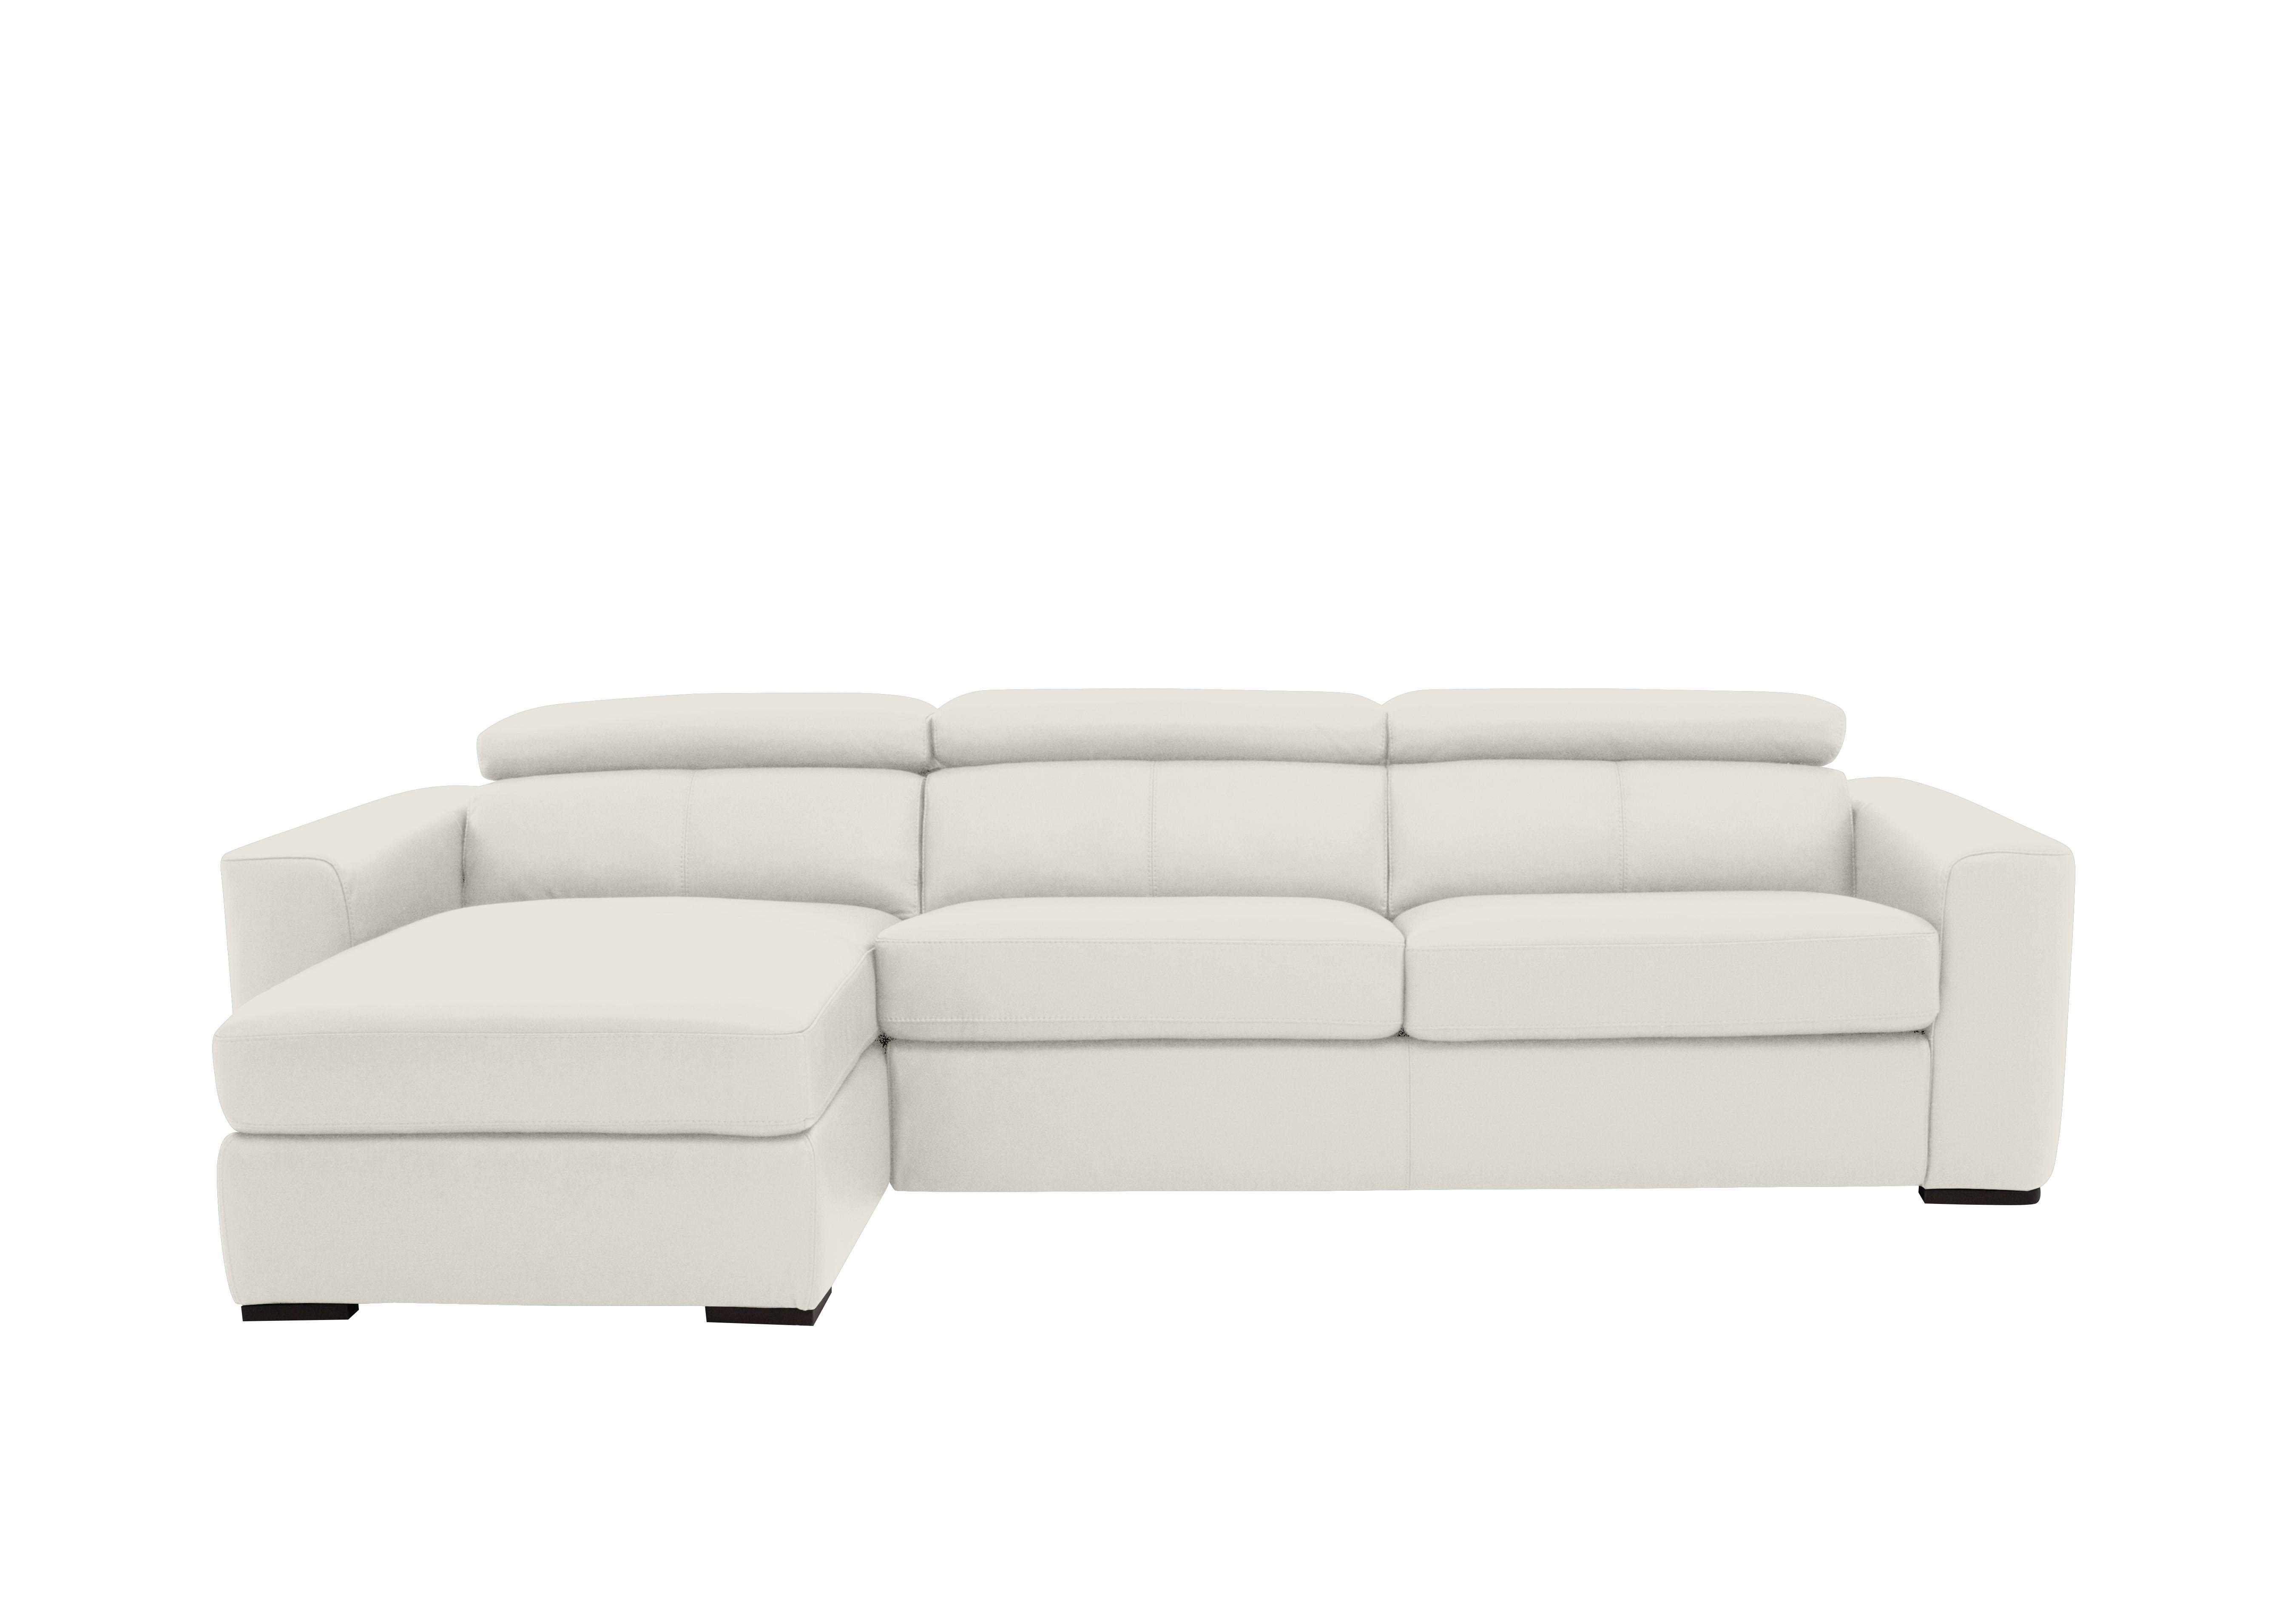 Infinity Leather Corner Chaise Sofabed with Storage in Bv-744d Star White on Furniture Village